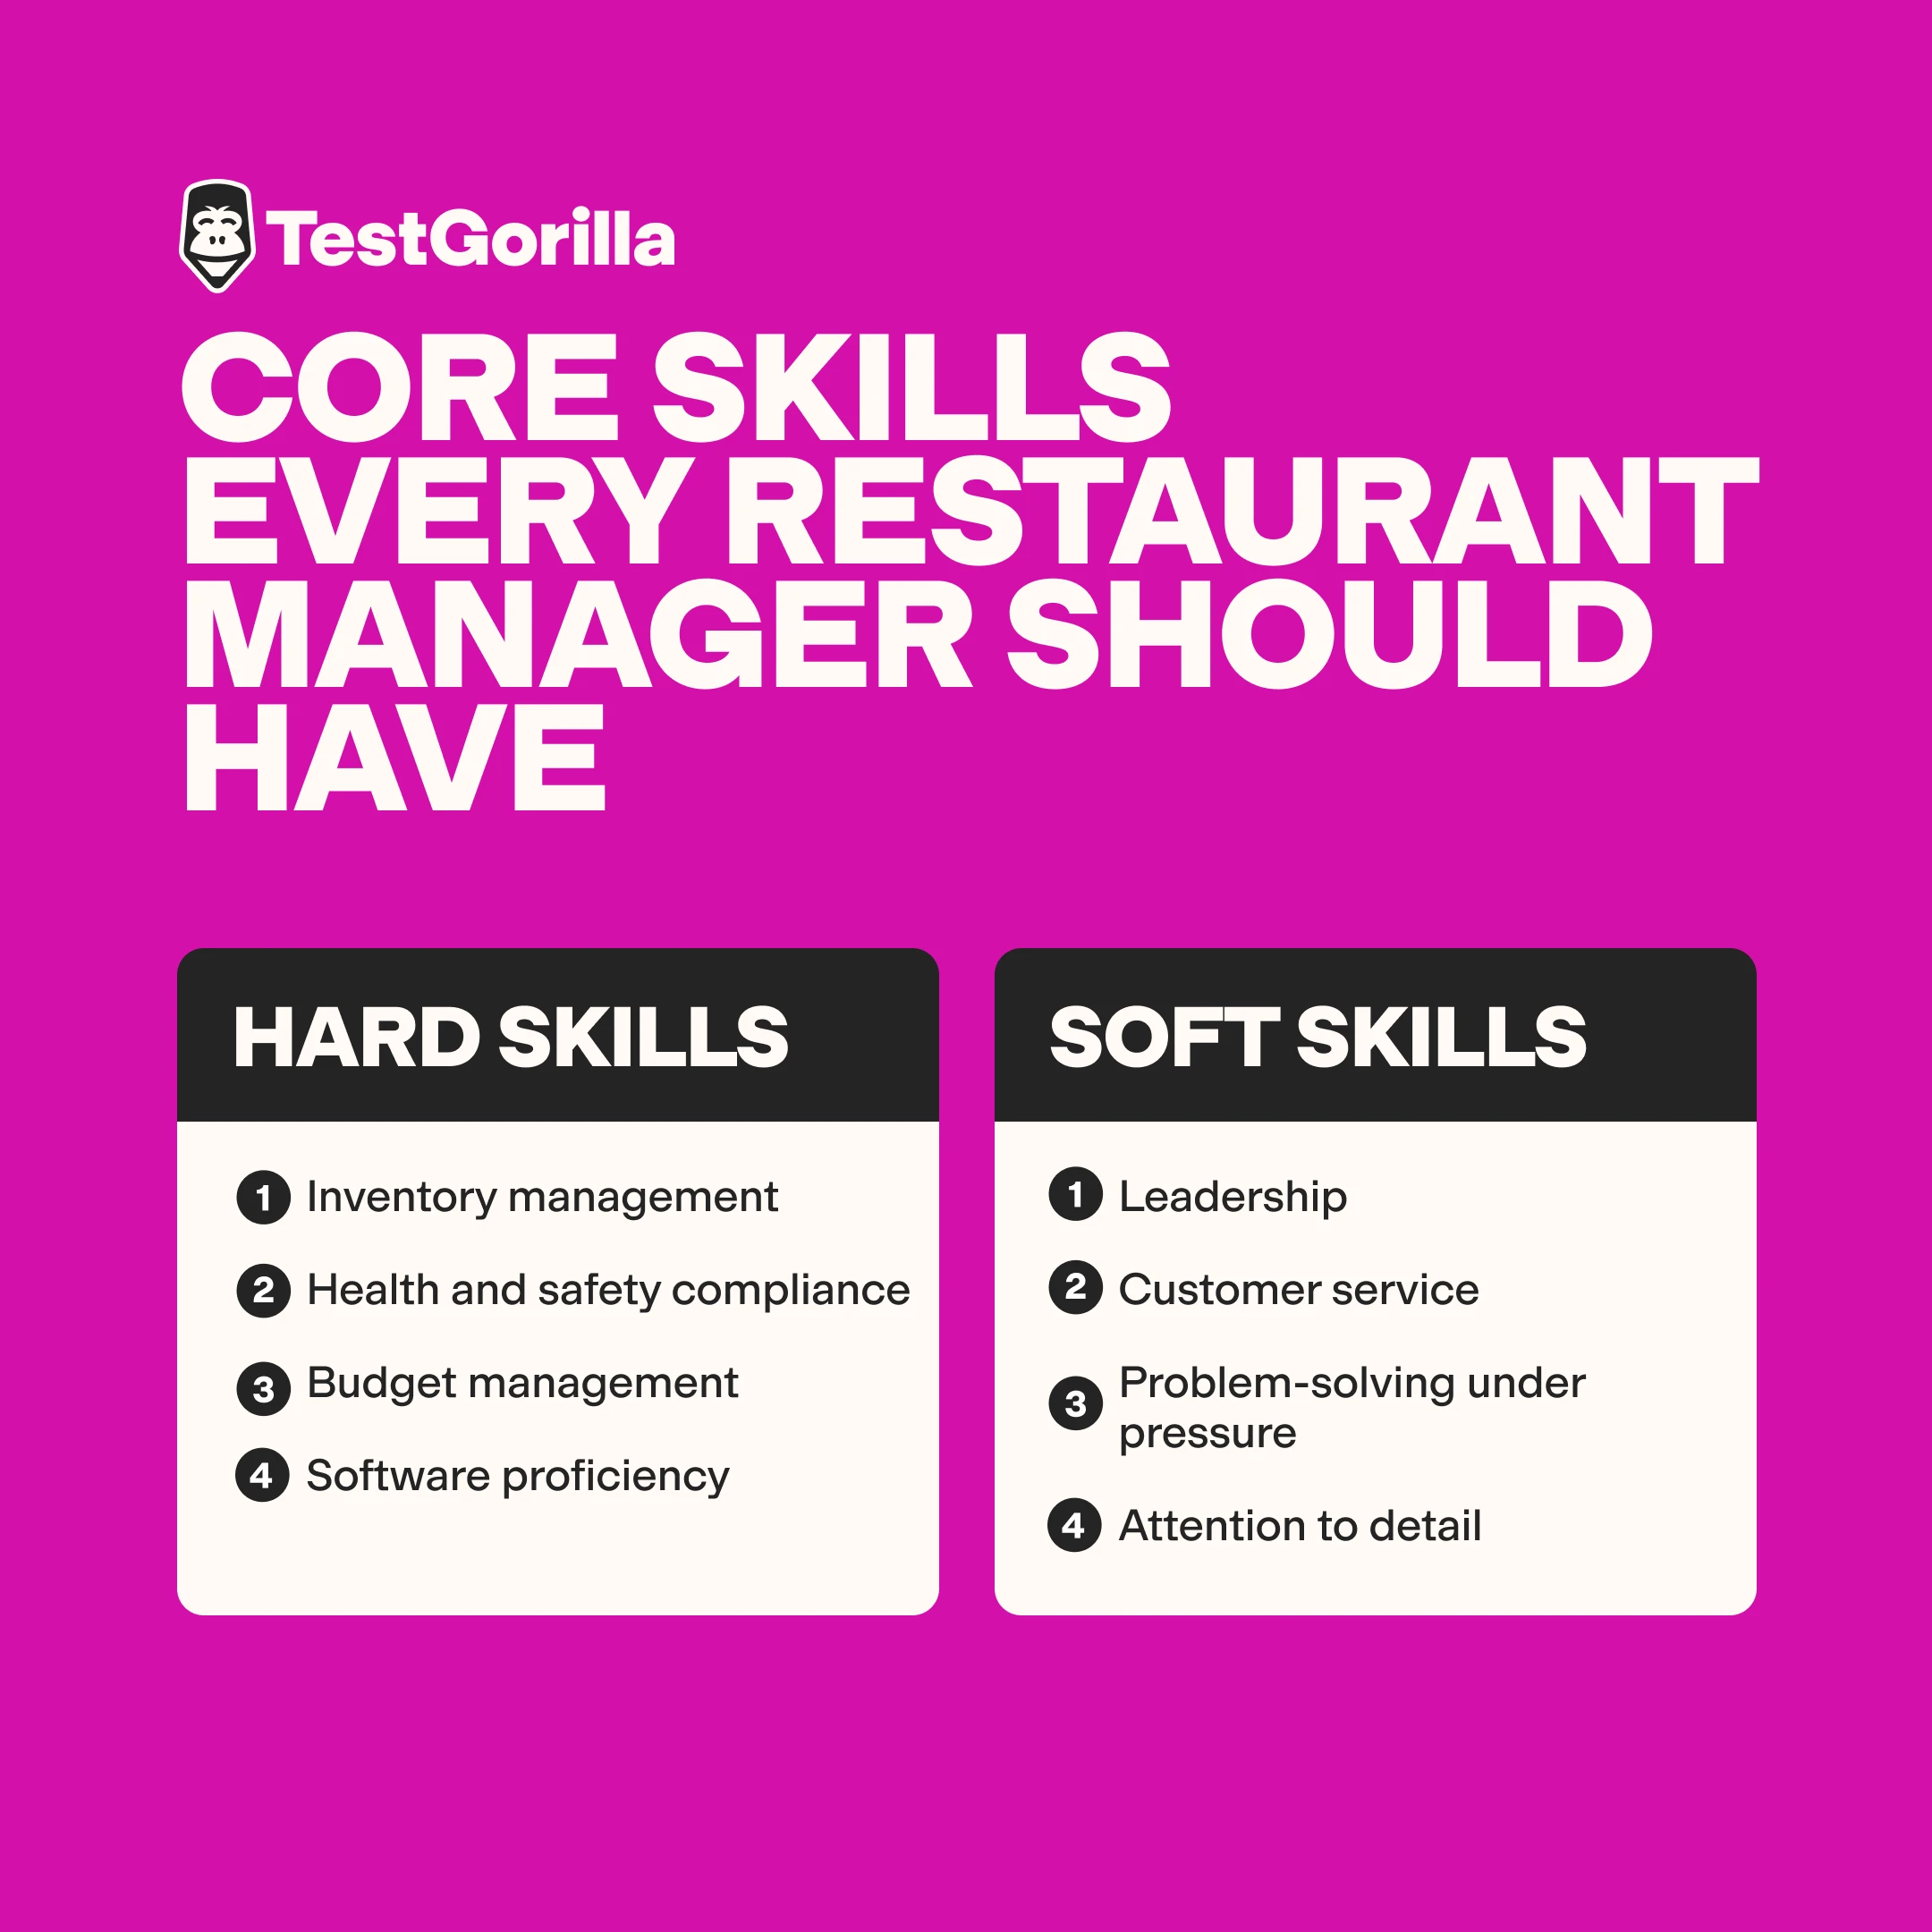 Core skills every restaurant manager should have graphic